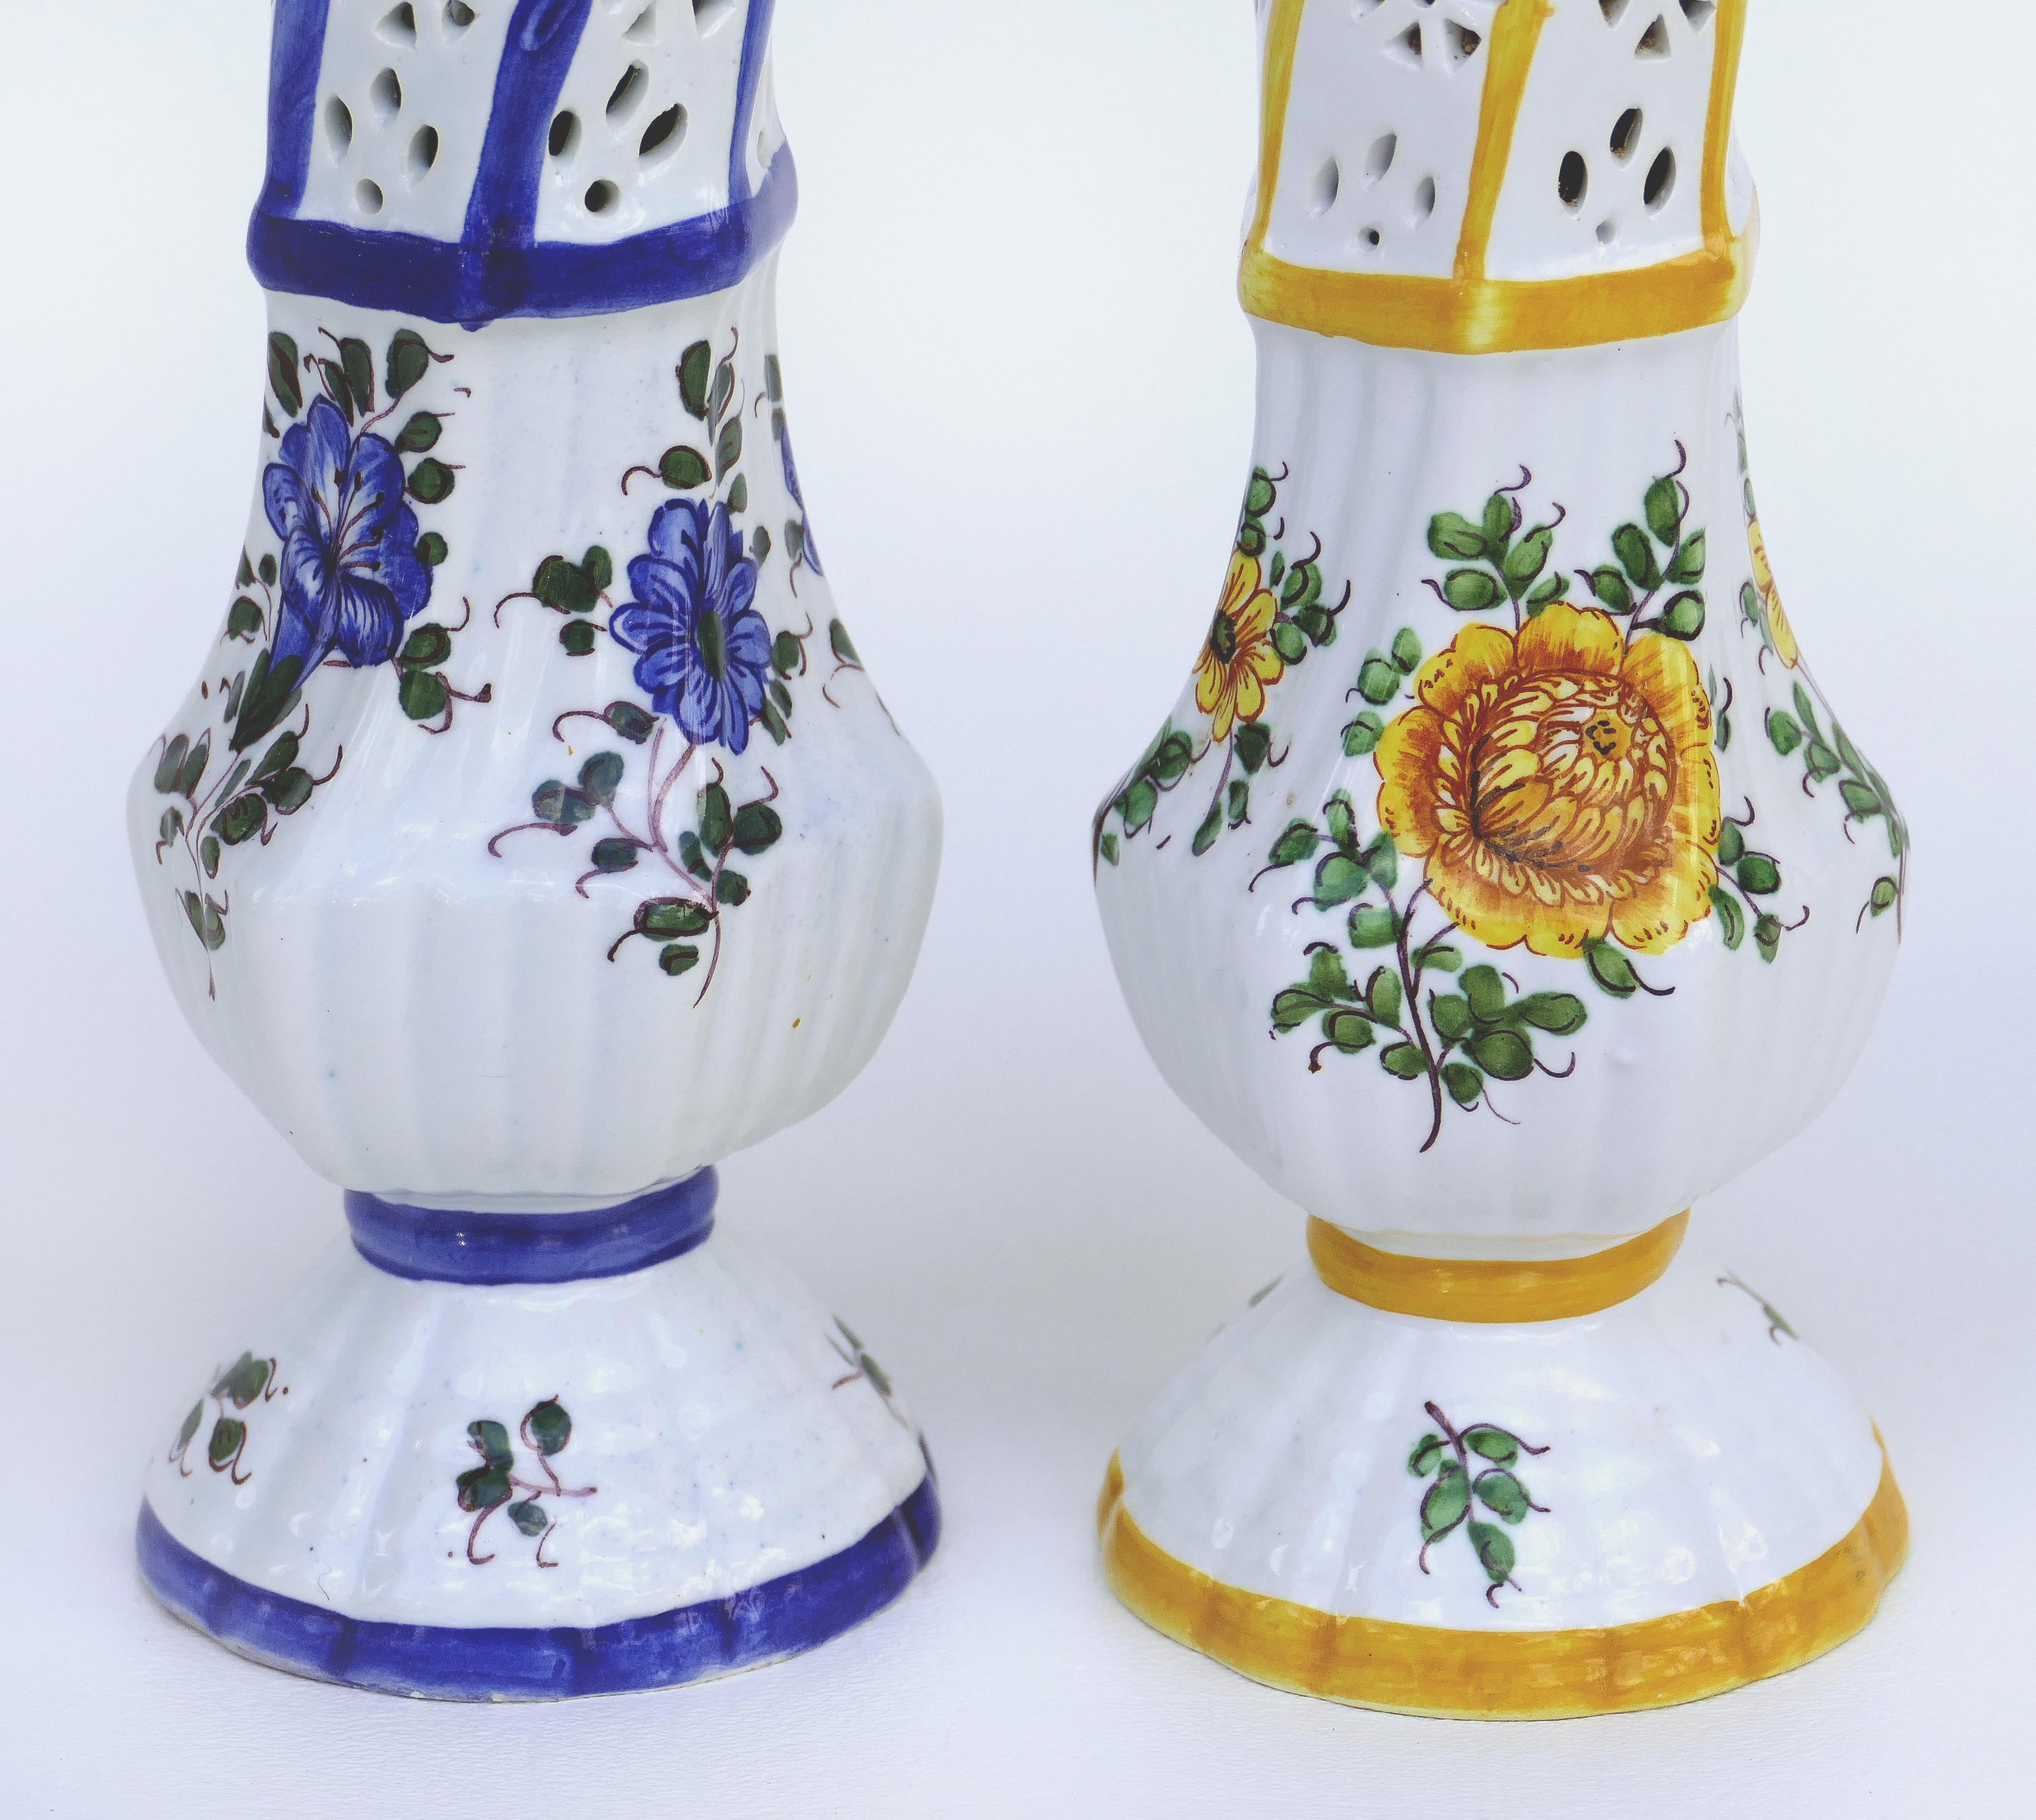 Meiselman Italian ceramic salt and pepper shakers, hand painted pair.

Offered for sale is a pair of ceramic Italian Meiselman hand painted salt and pepper shakers. Marked on the underside as pictured.